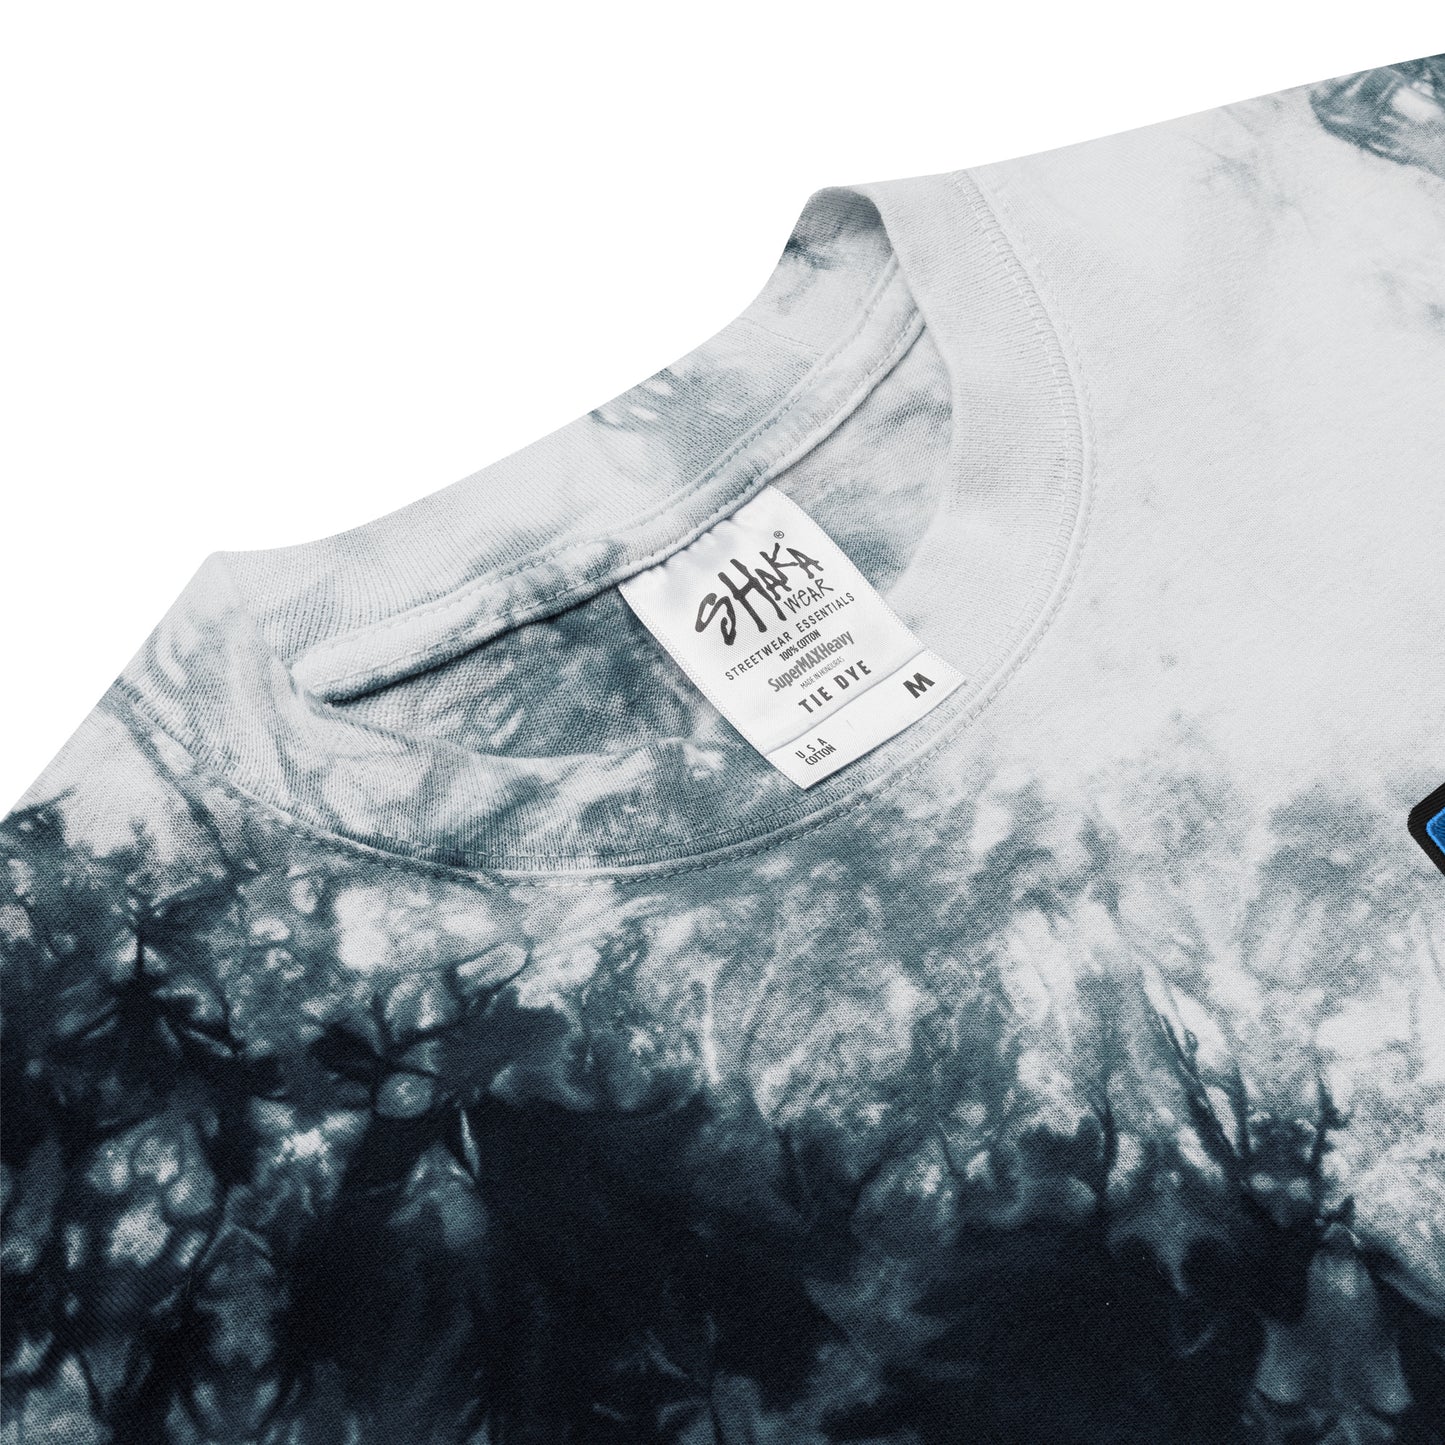 Dream More Tie Dye -Oversized - Shirts & Tops